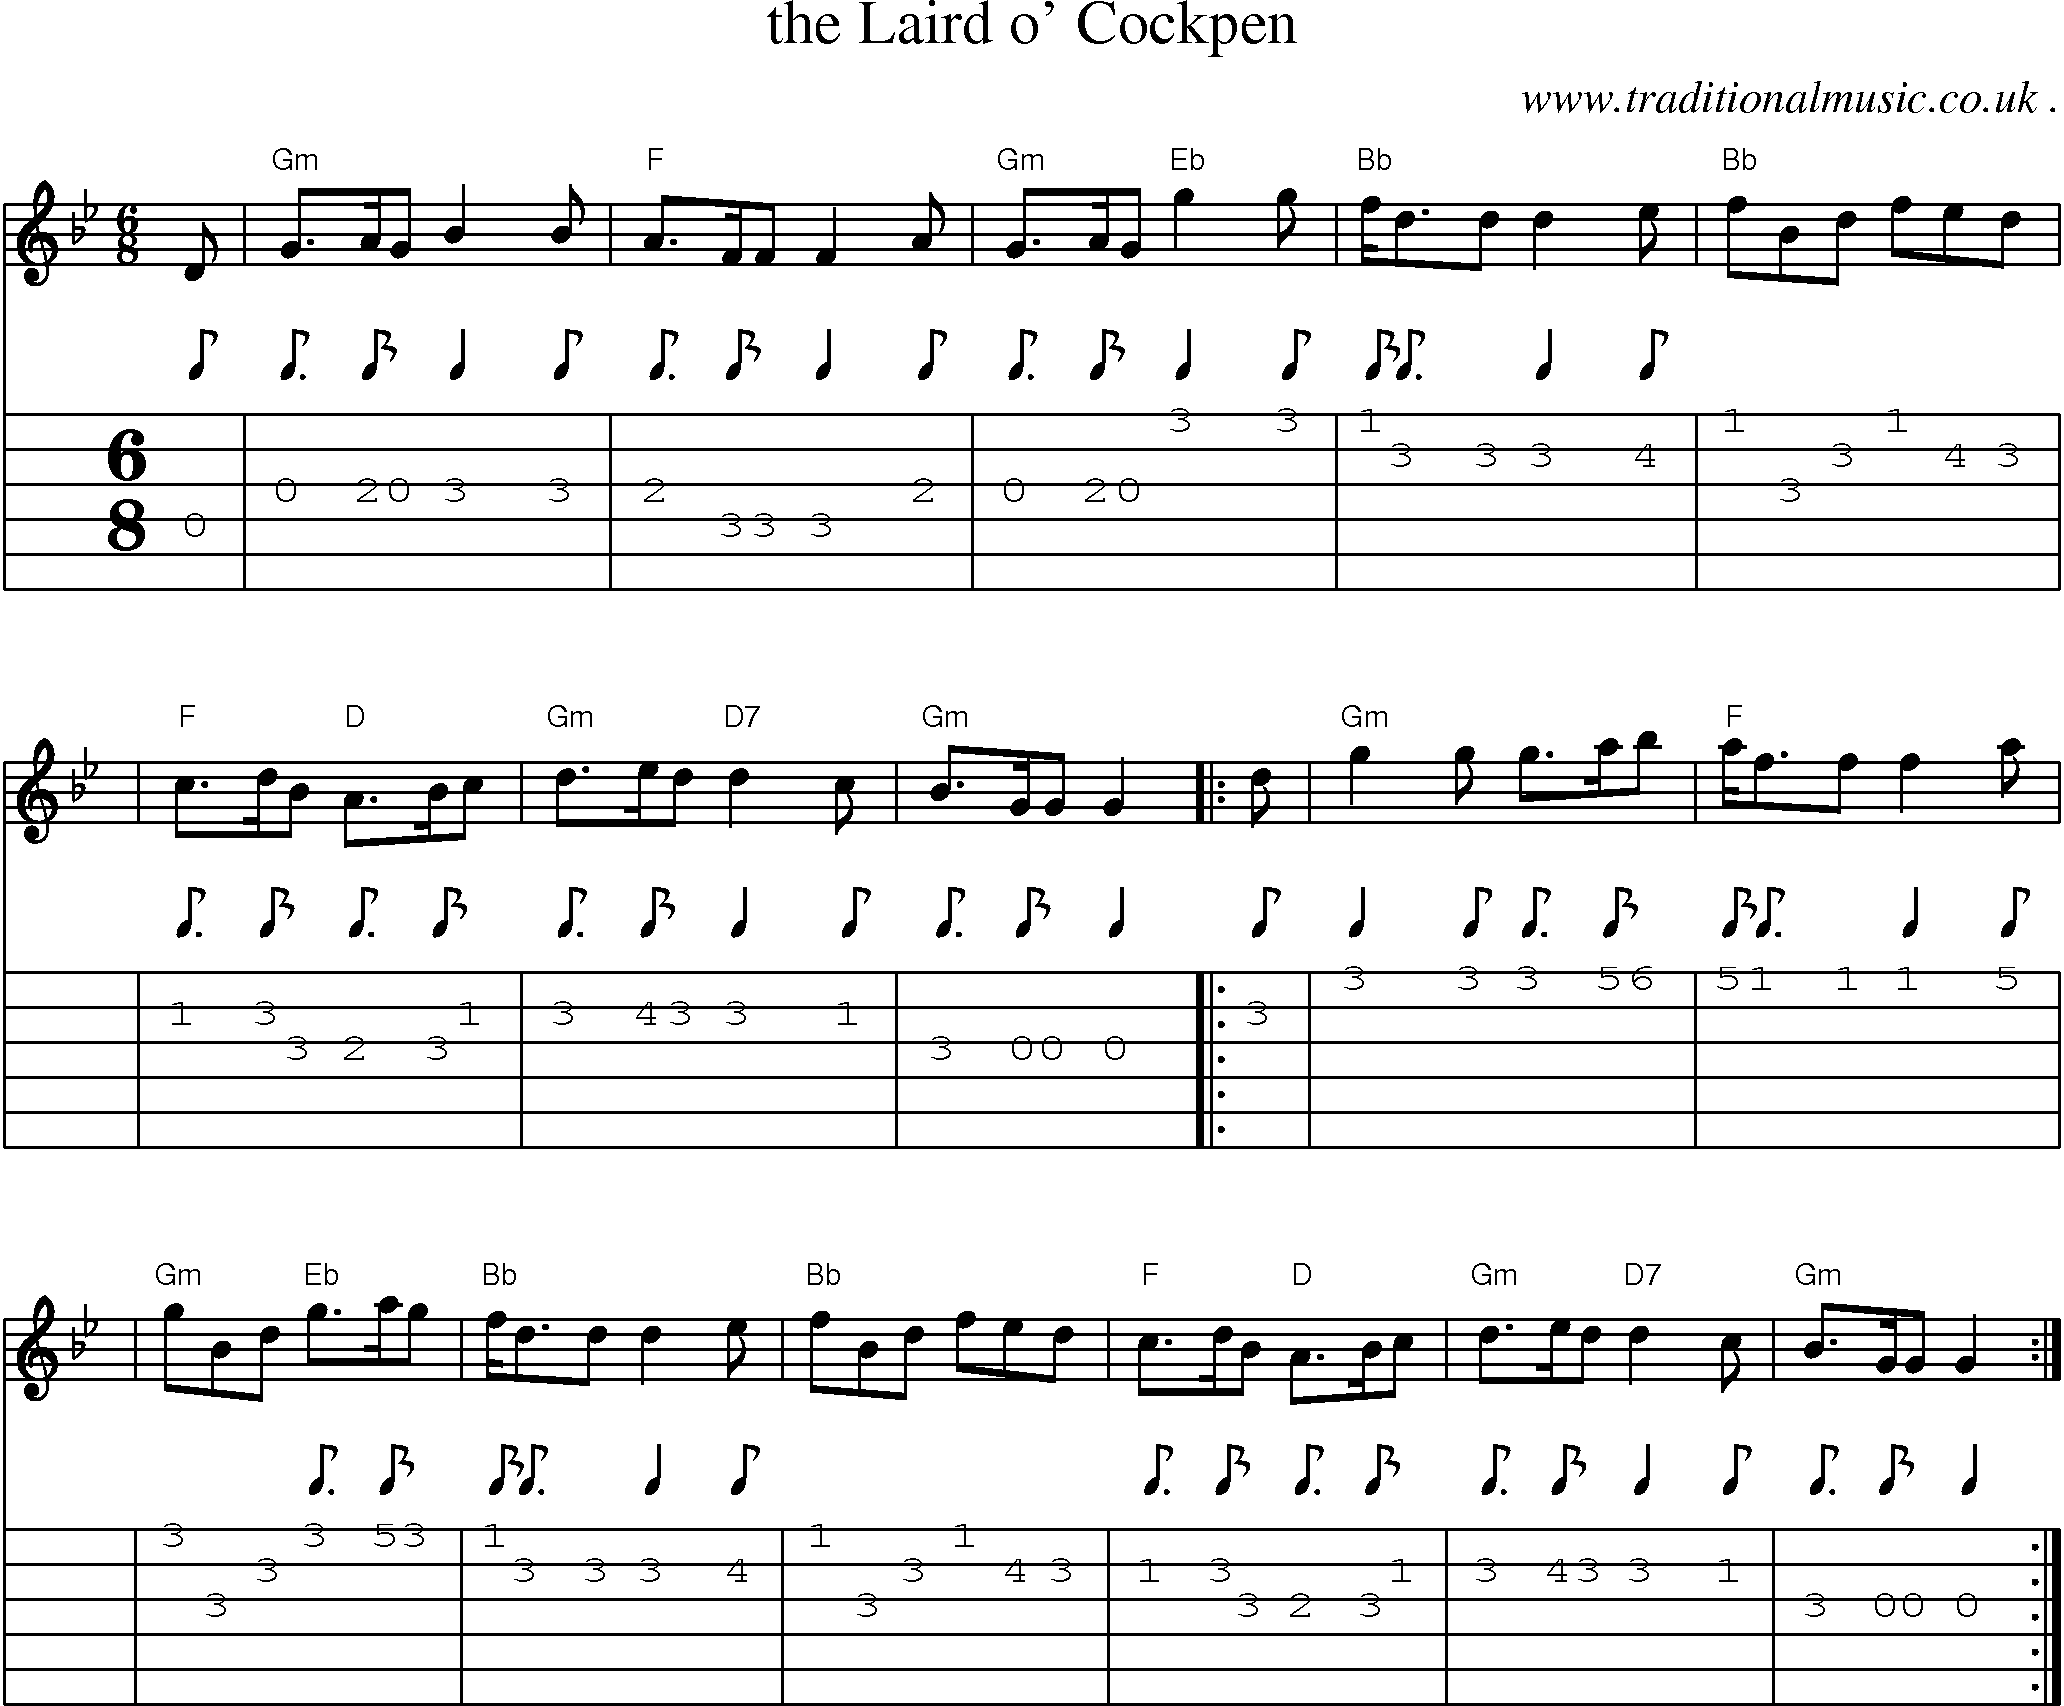 Sheet-music  score, Chords and Guitar Tabs for The Laird O Cockpen